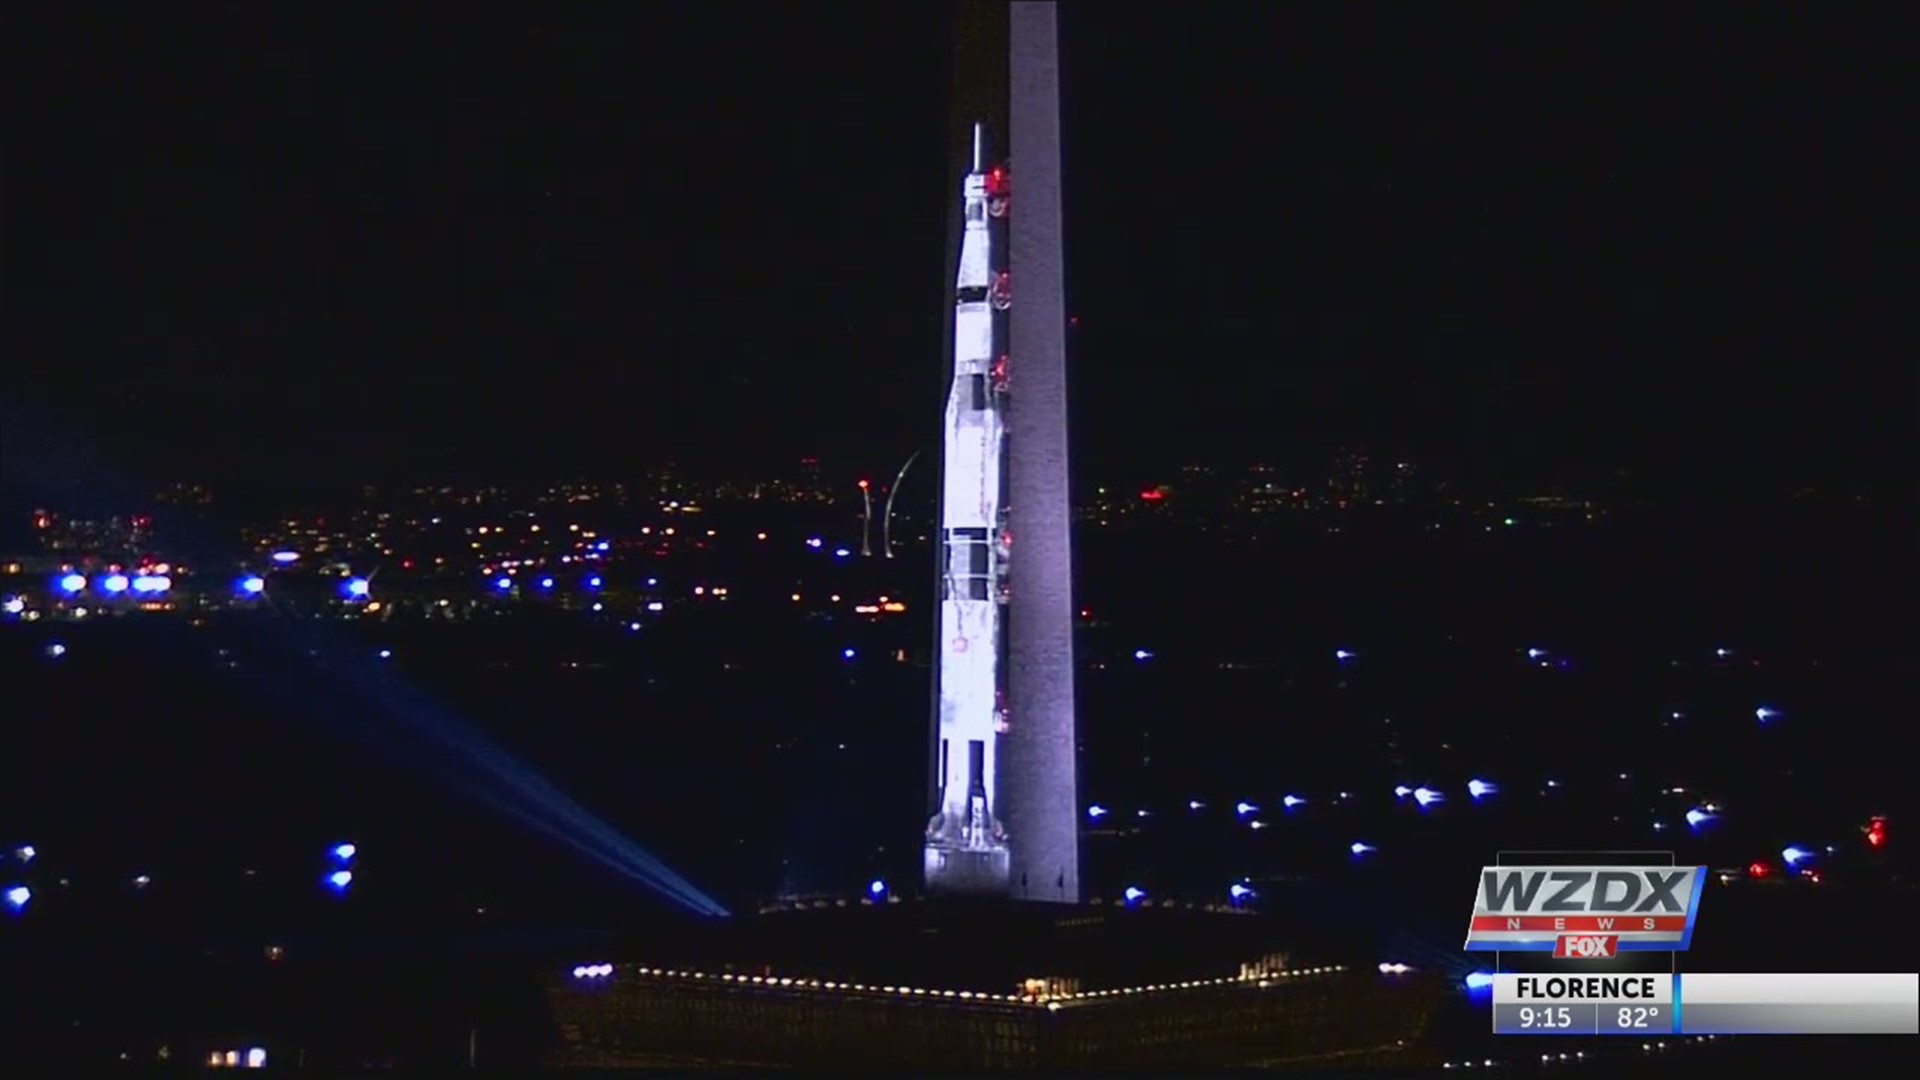 A life-sized image of the Saturn V rocket was projected onto the Washington monument this week.